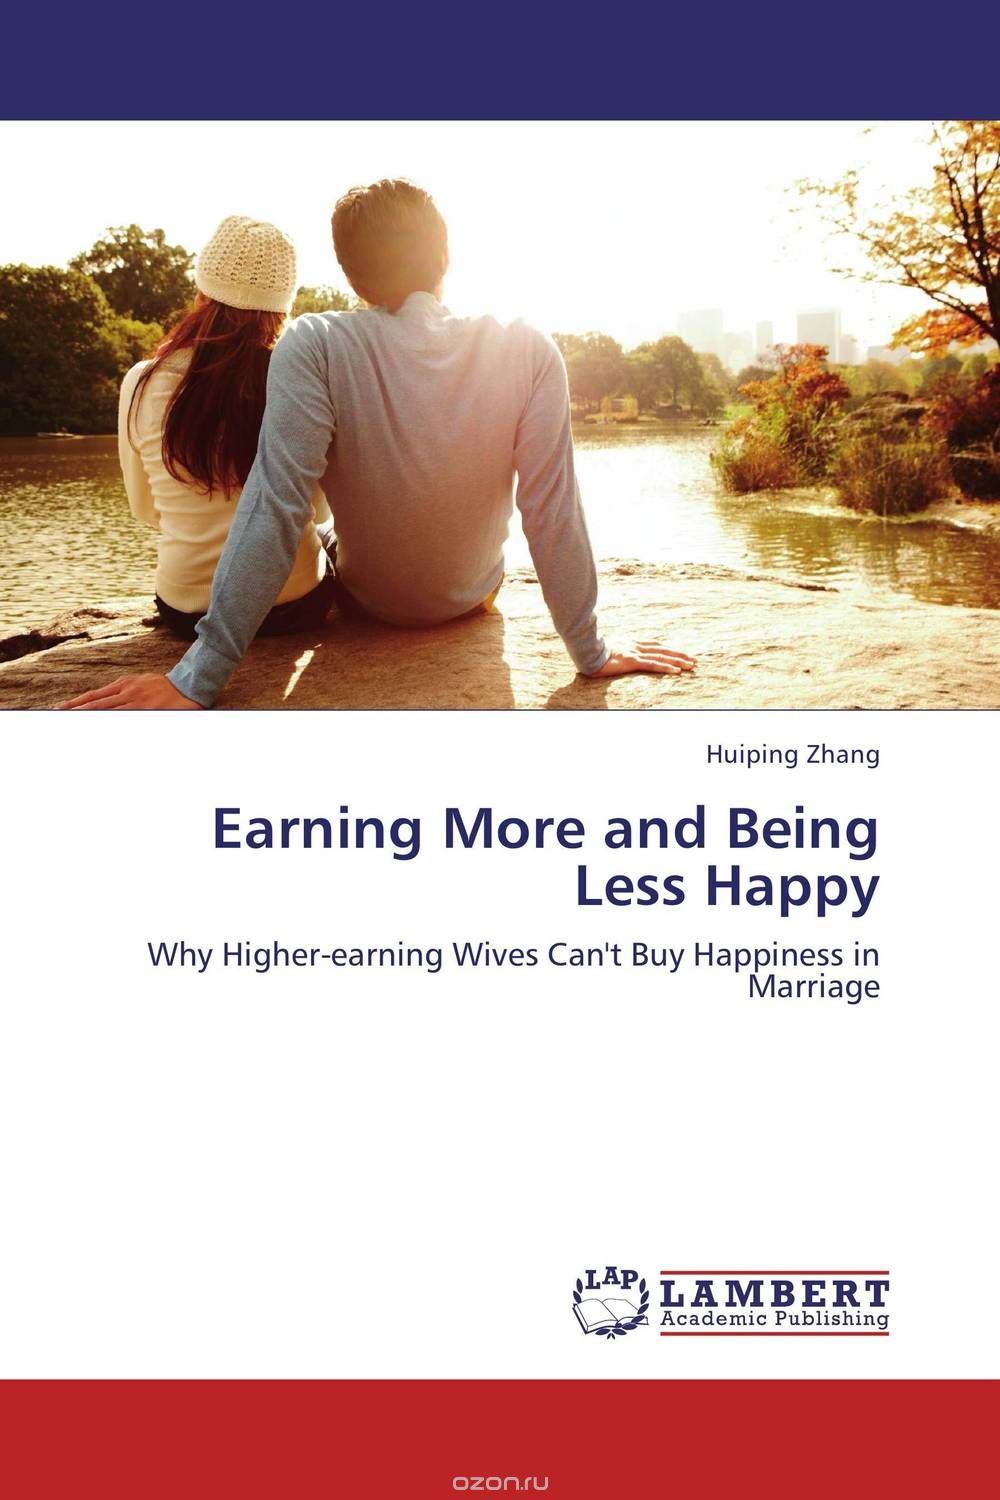 Скачать книгу "Earning More and Being Less Happy"